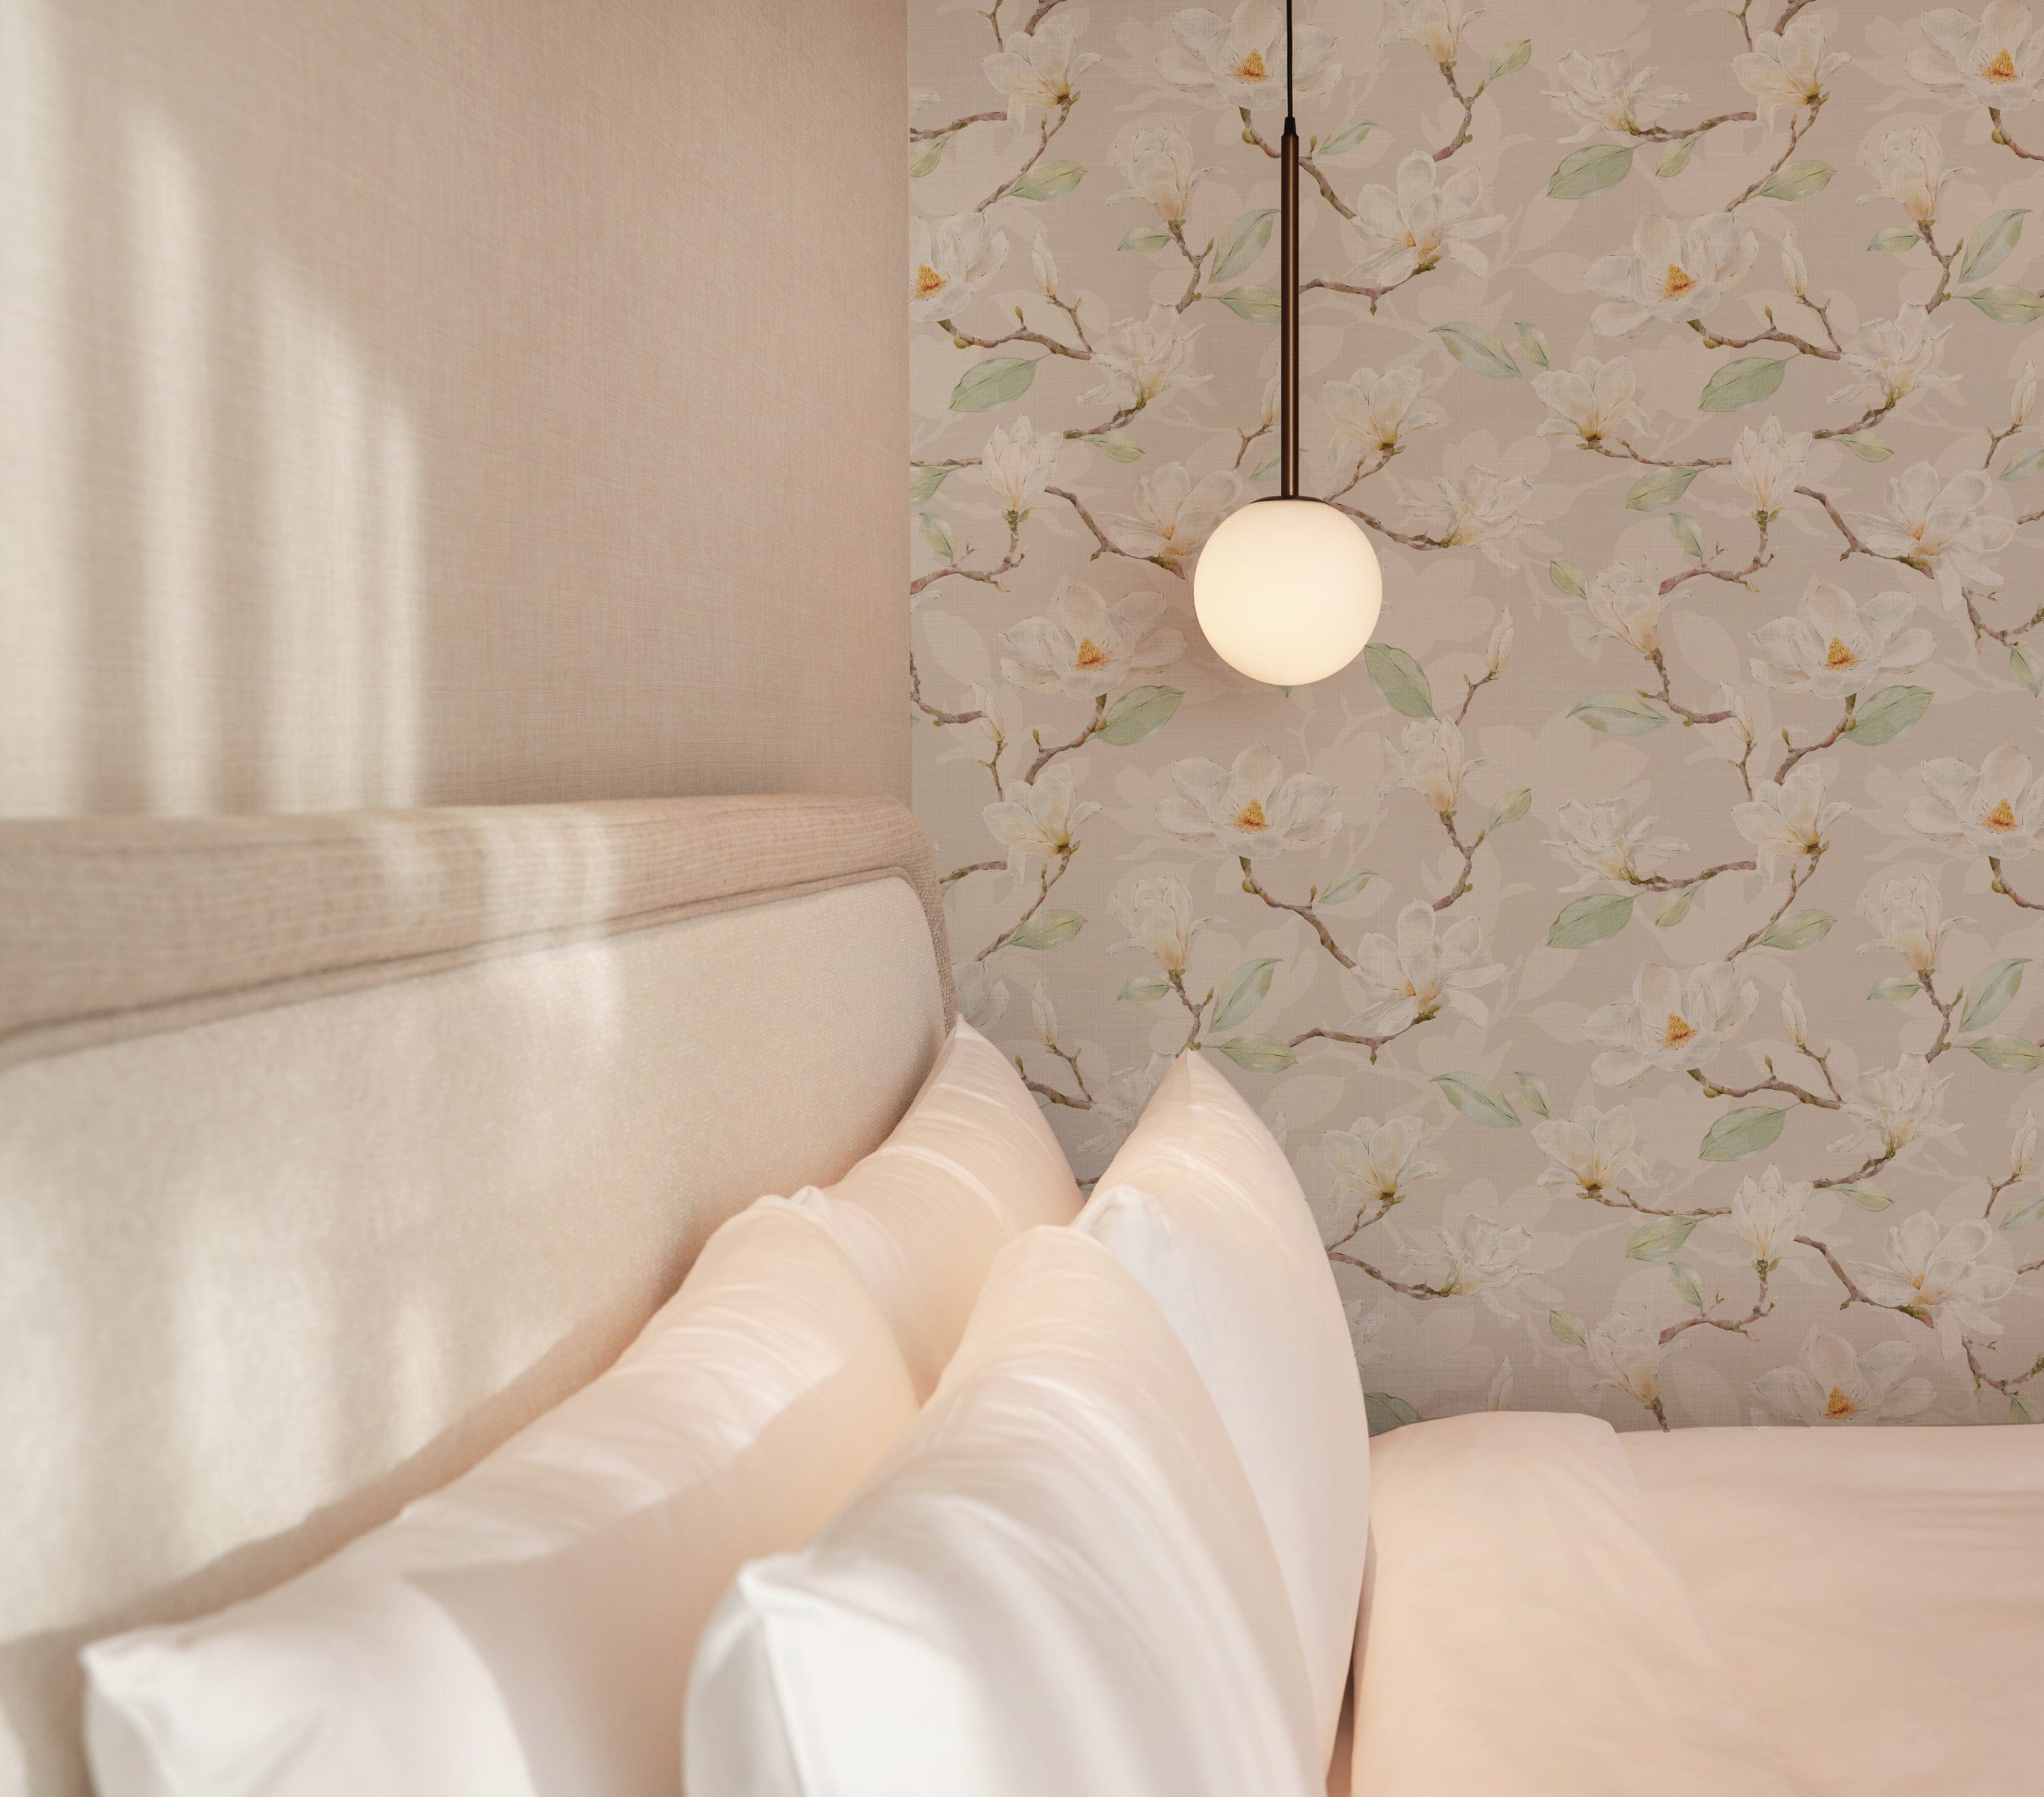 A serene bedroom setup with a single bulb pendant light casting a soft glow on a wall covered in gentle magnolia floral wallpaper, creating a relaxing and inviting atmosphere.